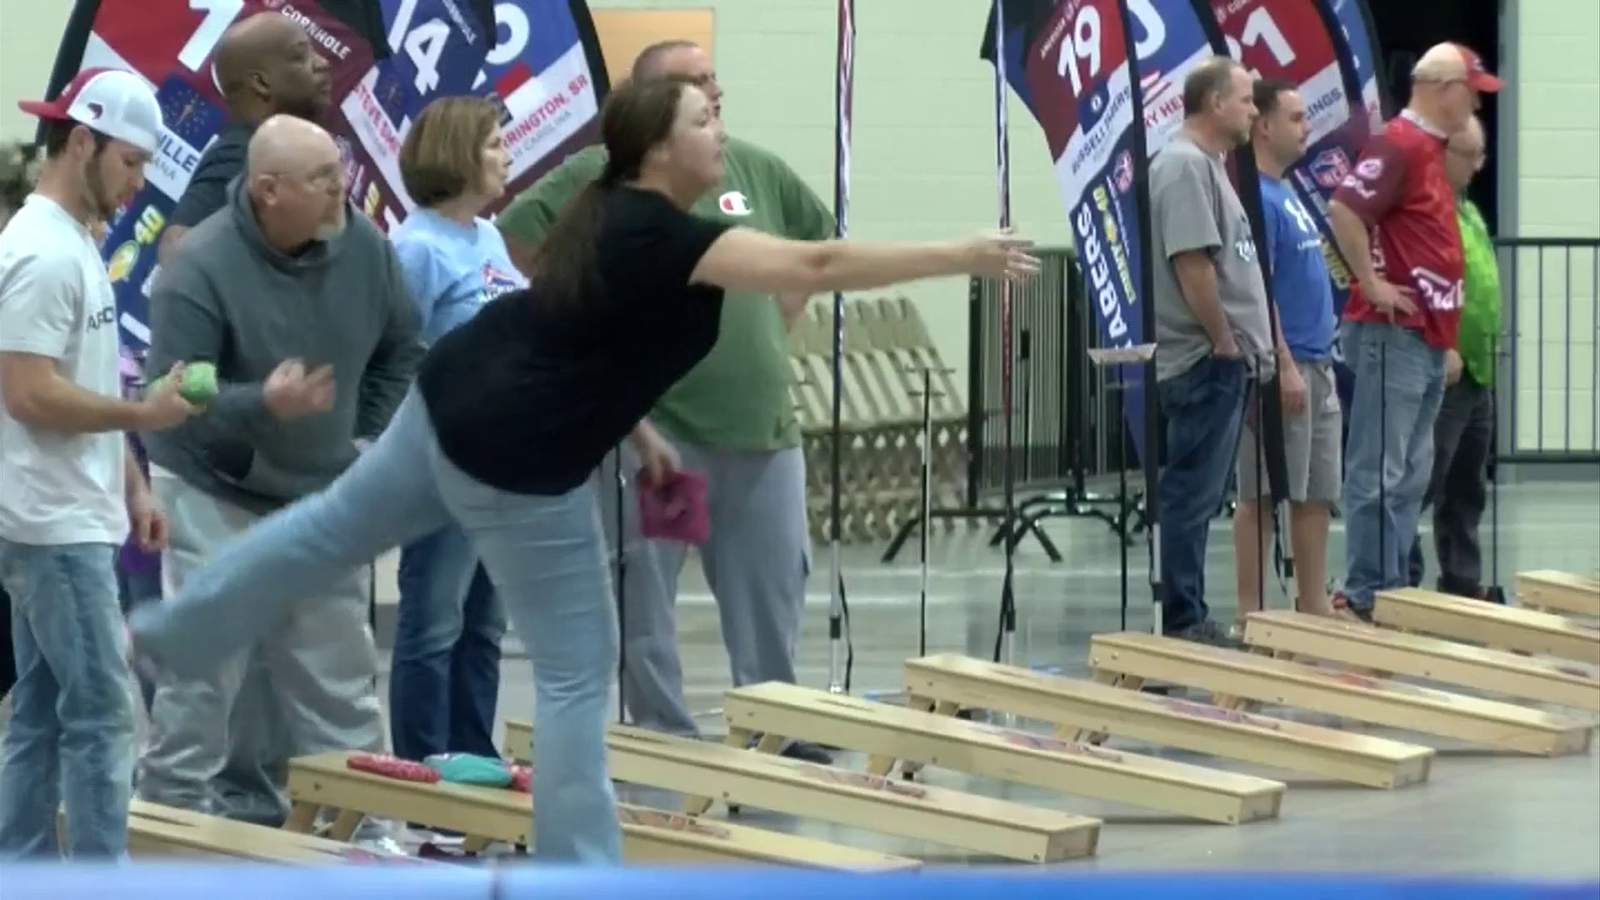 Someone could win up to $3,500 in Roanoke cornhole tournament